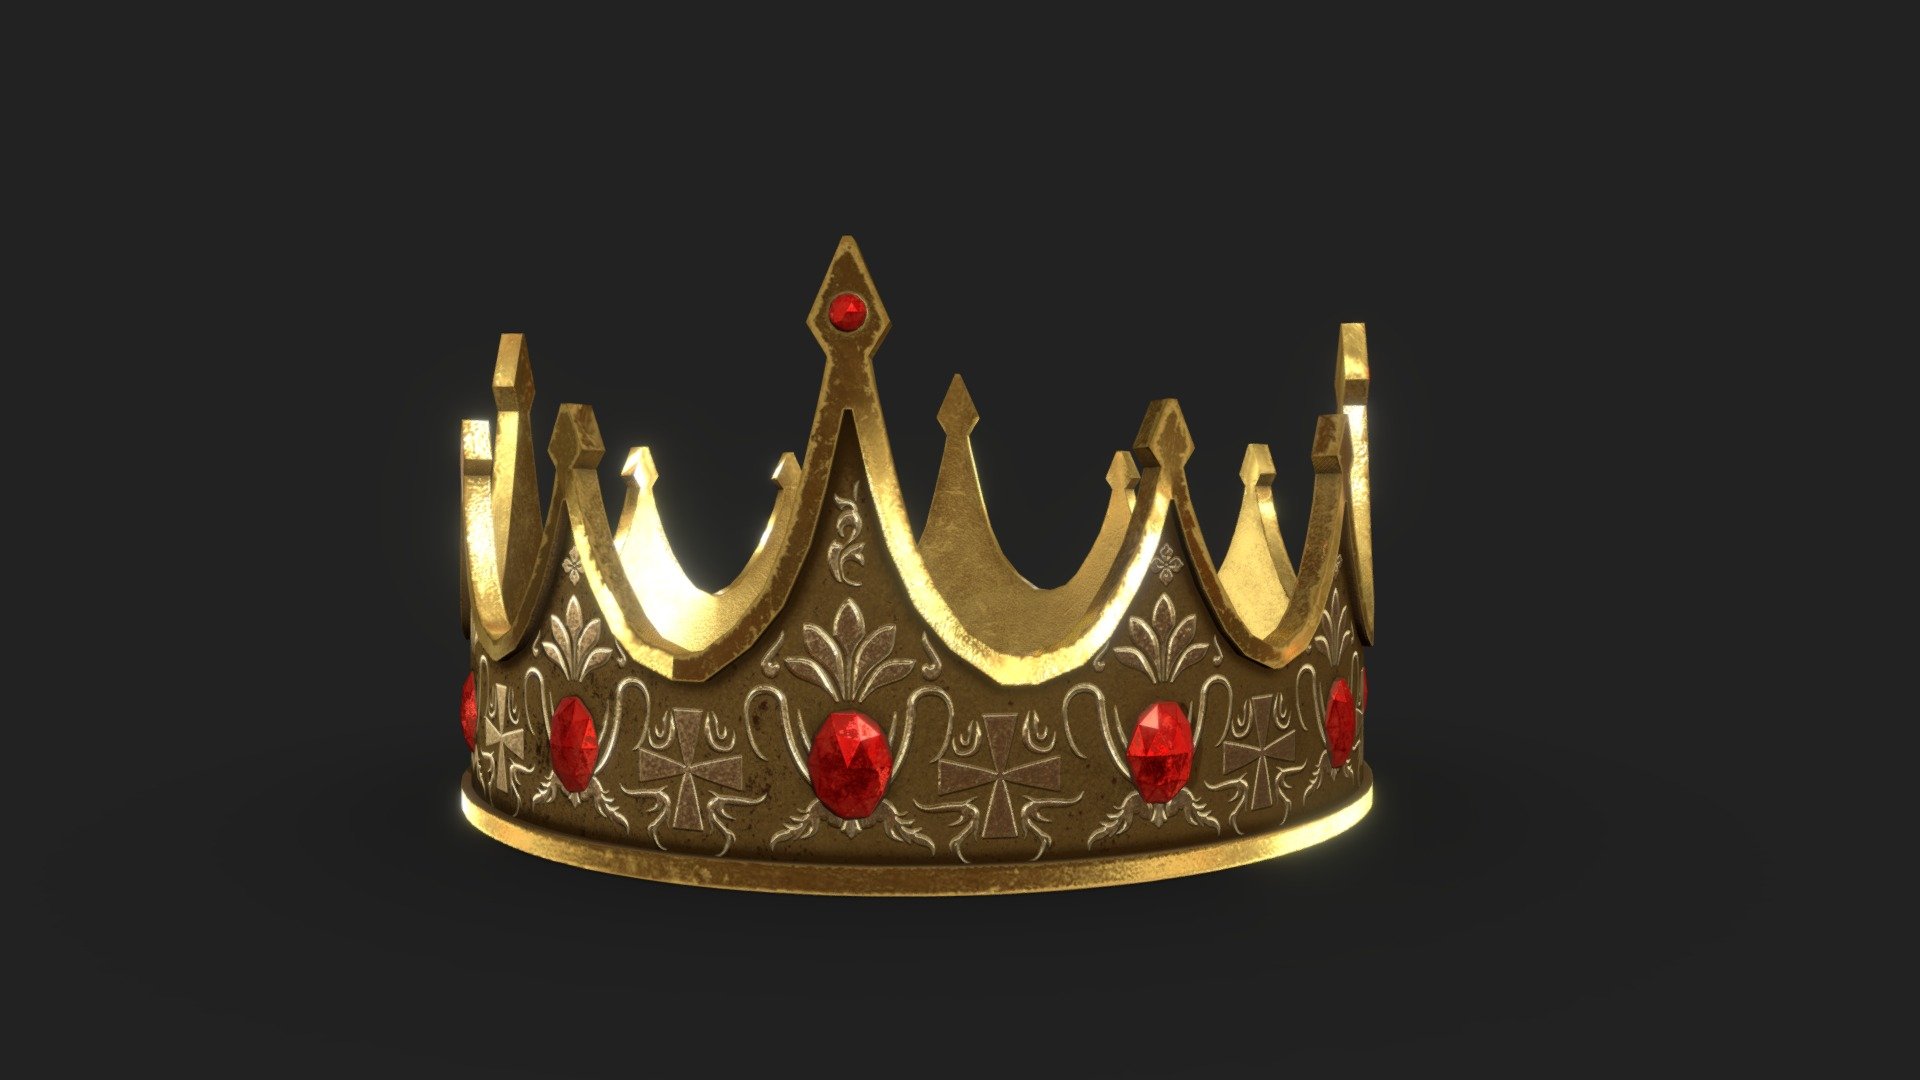 King's Crown




Game ready.

support various format such as Fbx, Obj, Collada, Stl, and blend file.

lowpoly model.

With PBR textures.

High resolution texture up to 2k.

Commercially Use.

Very optimized With just 3,248 vertices.

we carefully build this product in blender and texturized in Substance Painter.

I love to hear your feedback!



 - King Crown - Buy Royalty Free 3D model by gianraga1 3d model